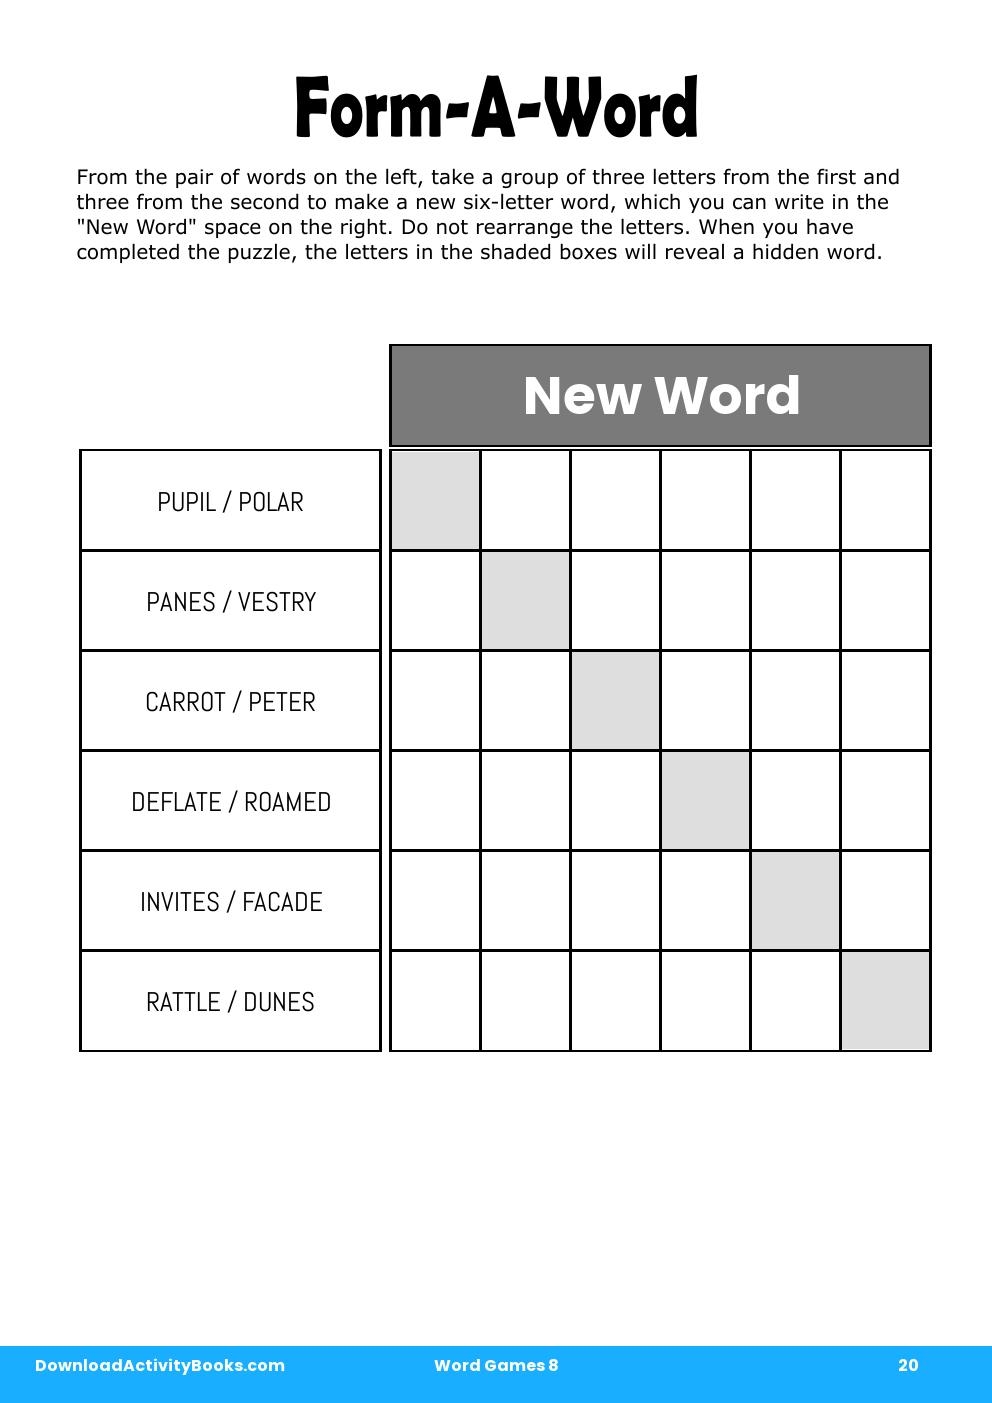 Form-A-Word in Word Games 8